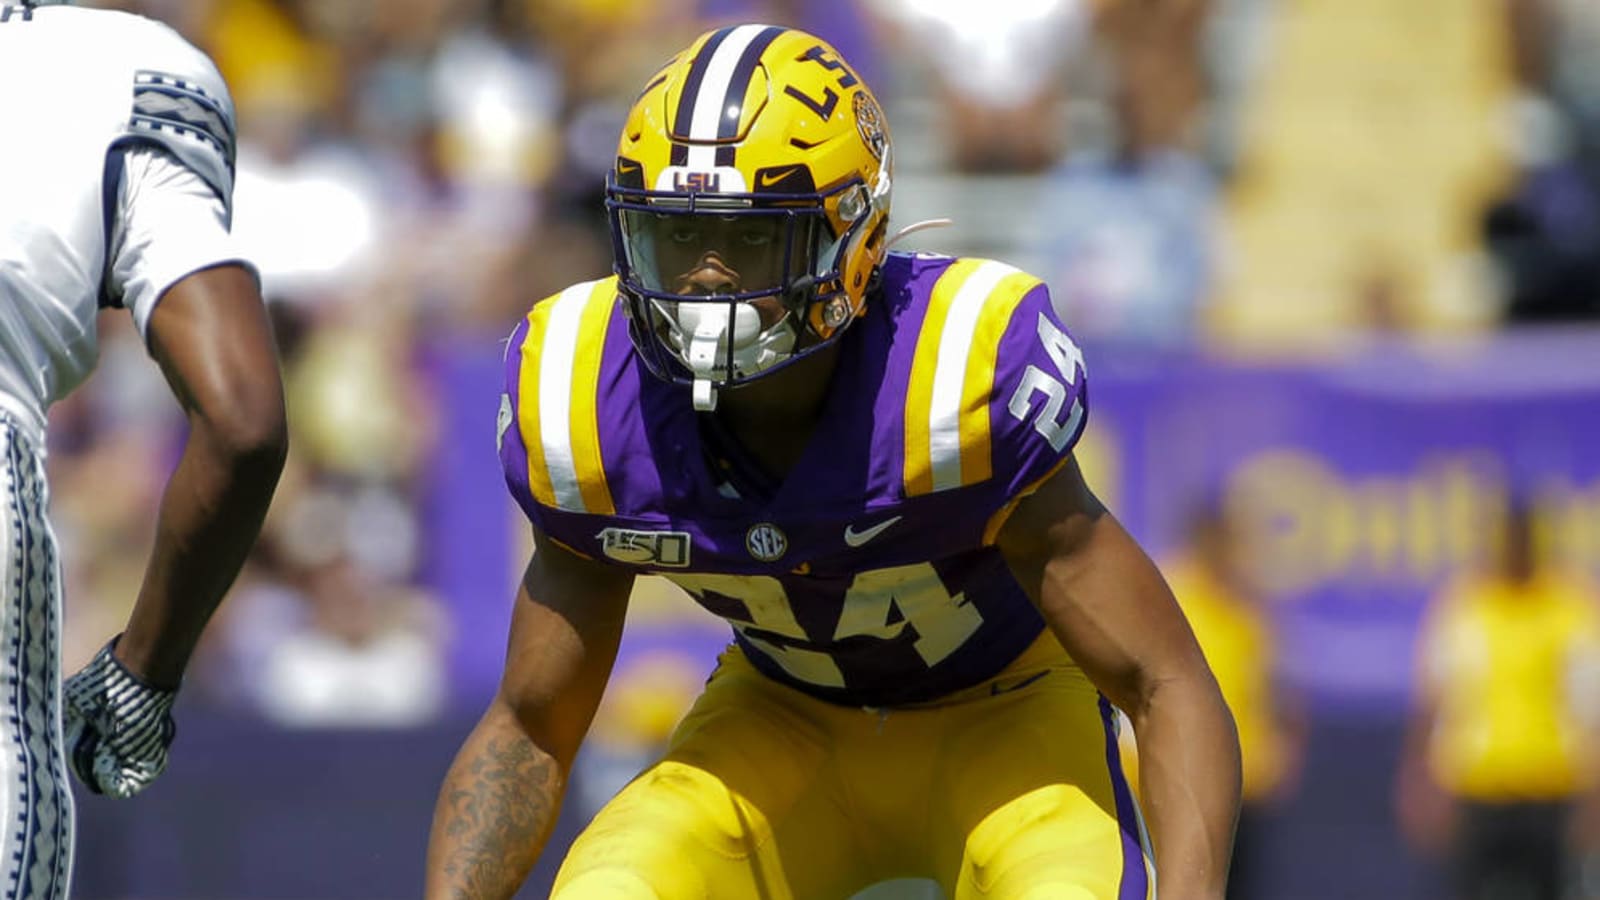 LSU coaches caused CB Derek Stingley Jr. to get burned on long touchdown